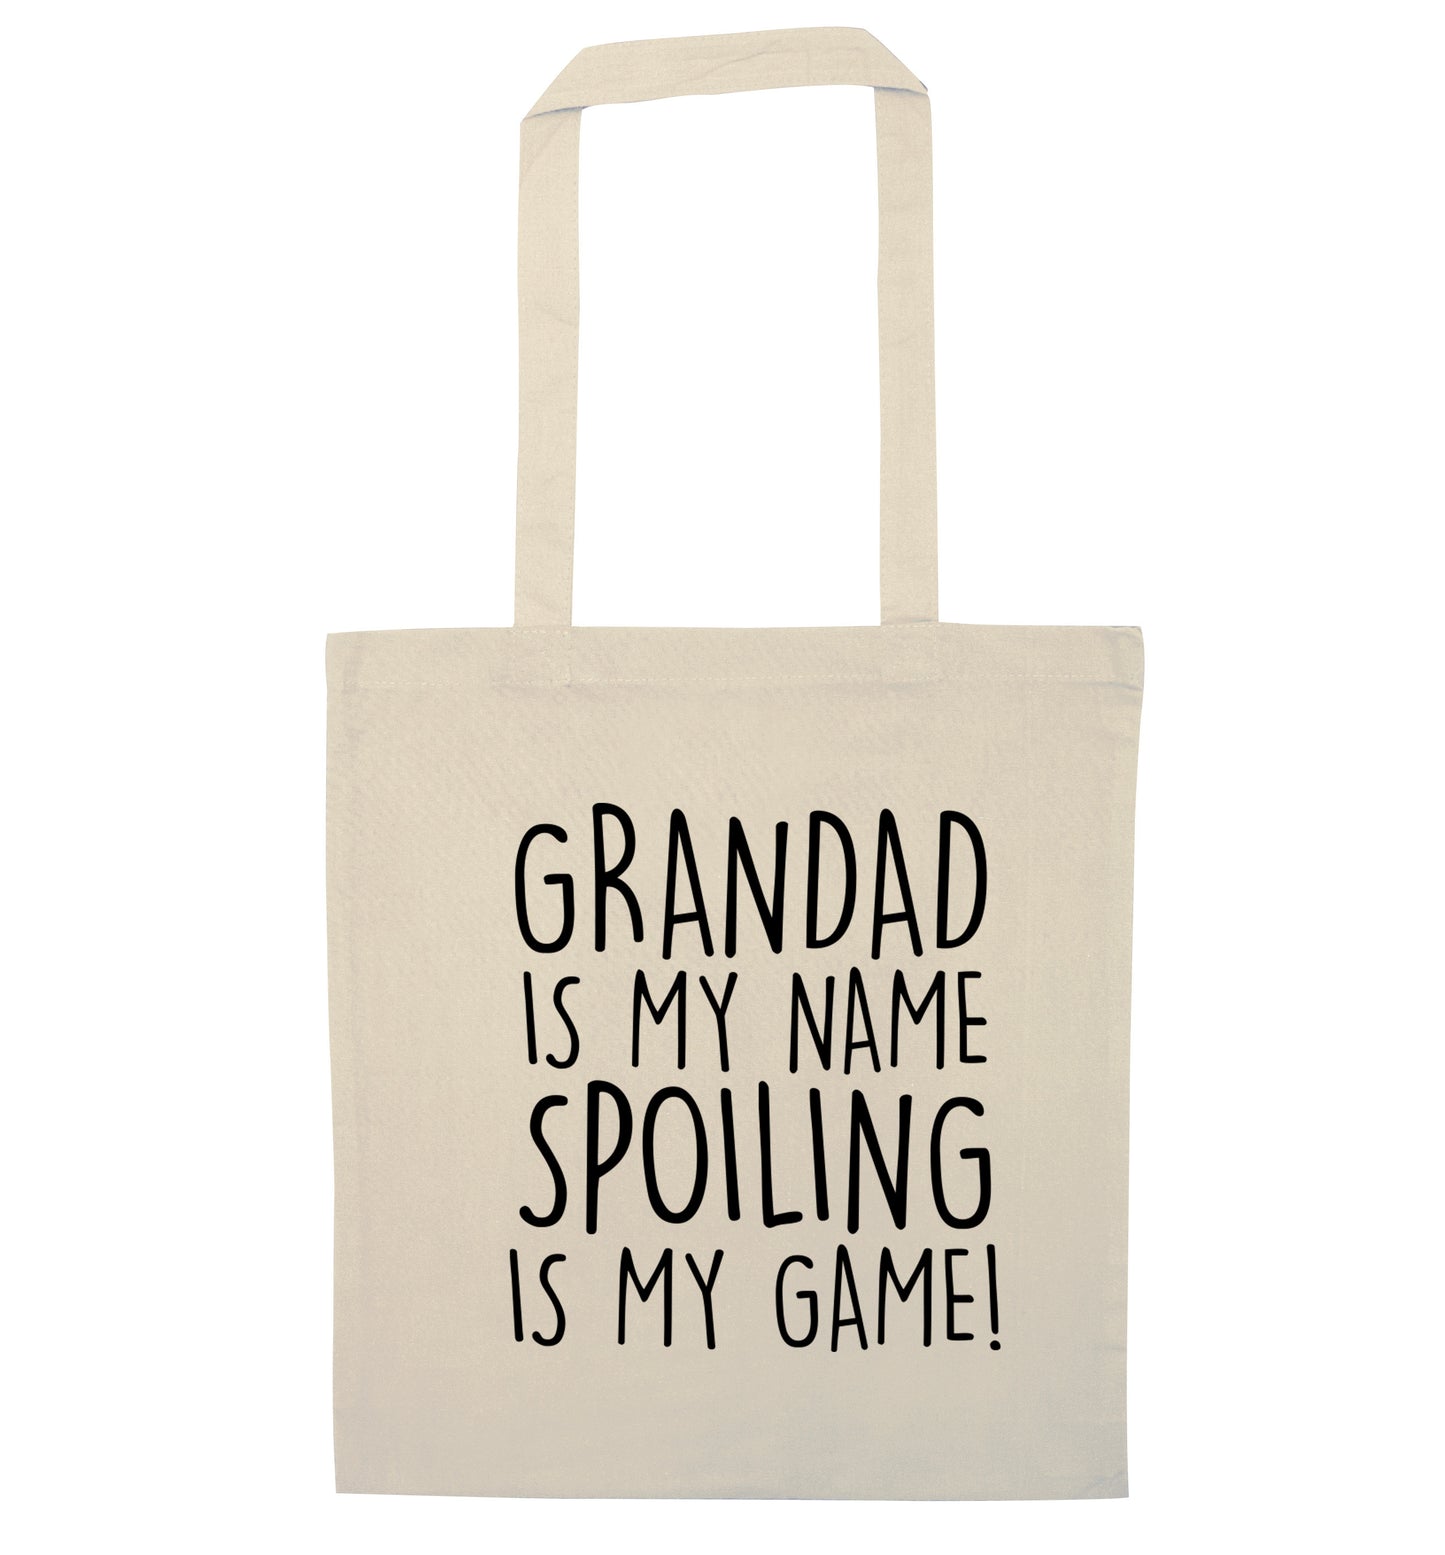 Grandad is my name, spoiling is my game natural tote bag